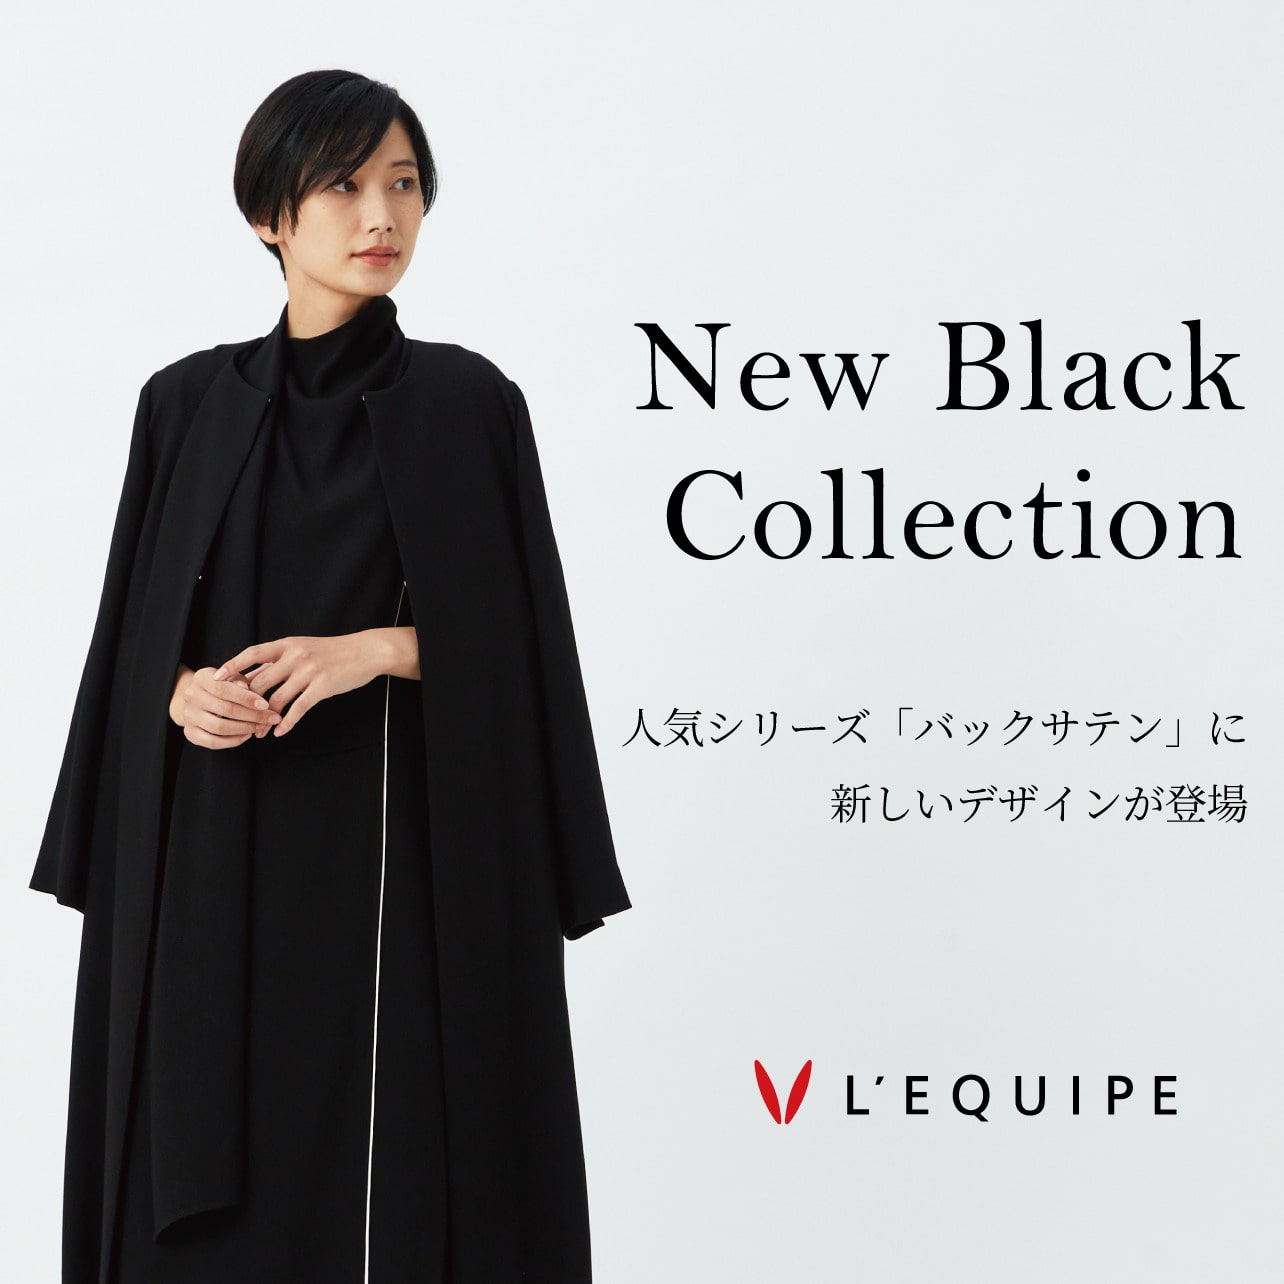 New Black Collection